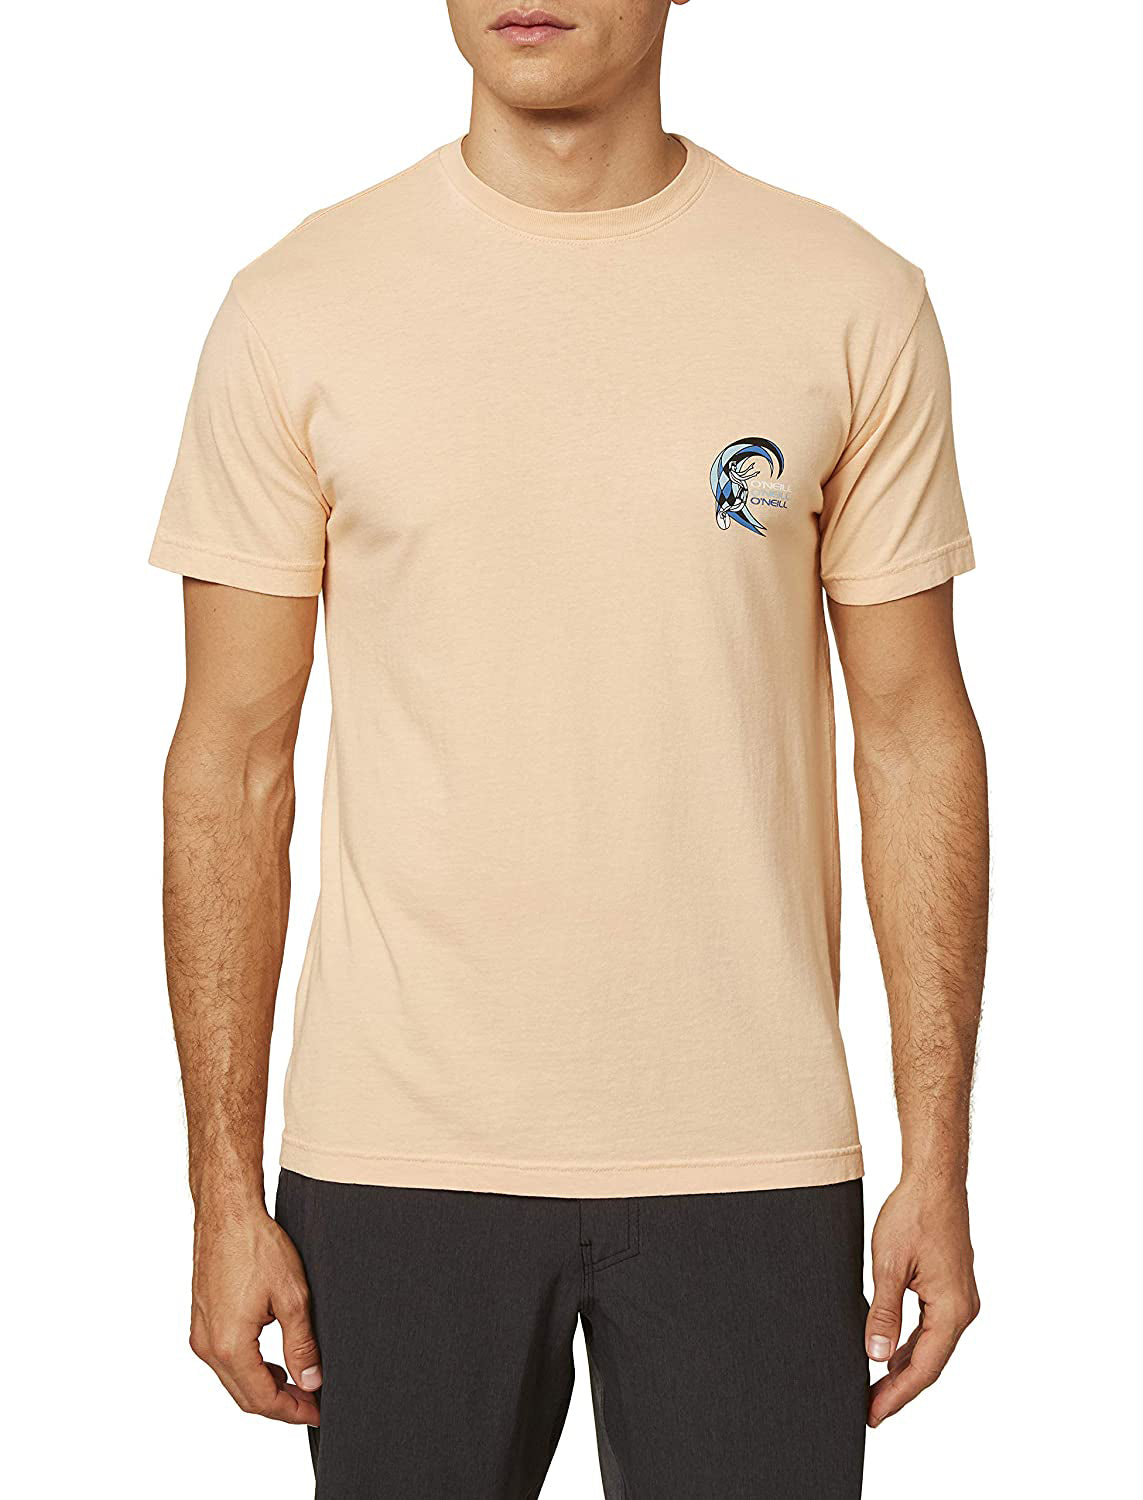 ONeill Full Cycle Short Sleeve Tee CPR S